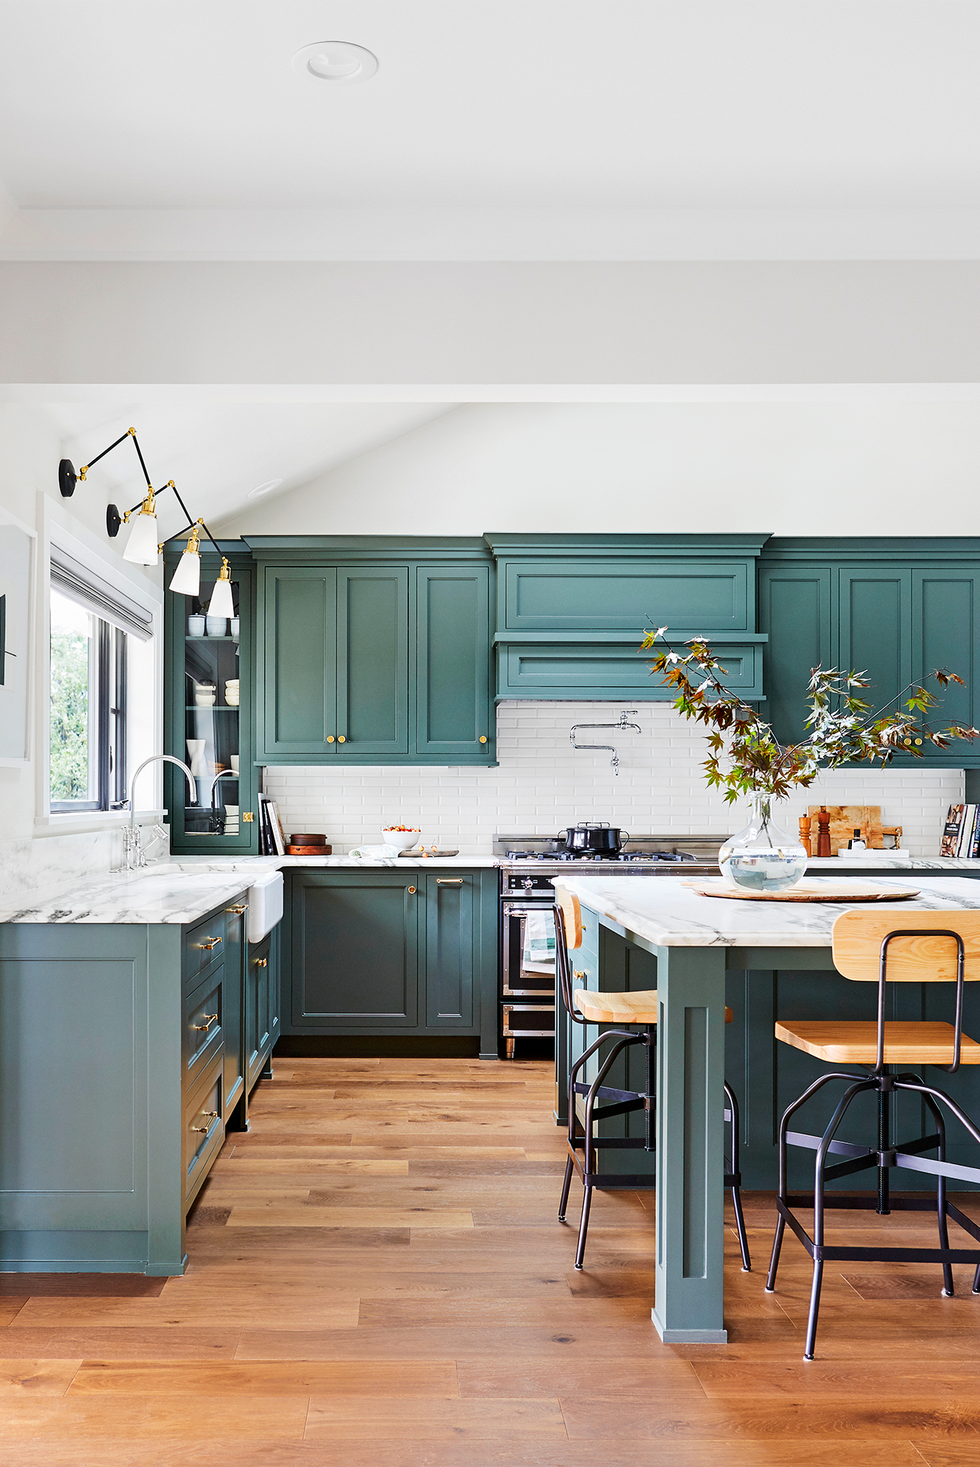 Our Favorite Green Kitchen Designs for Your Home